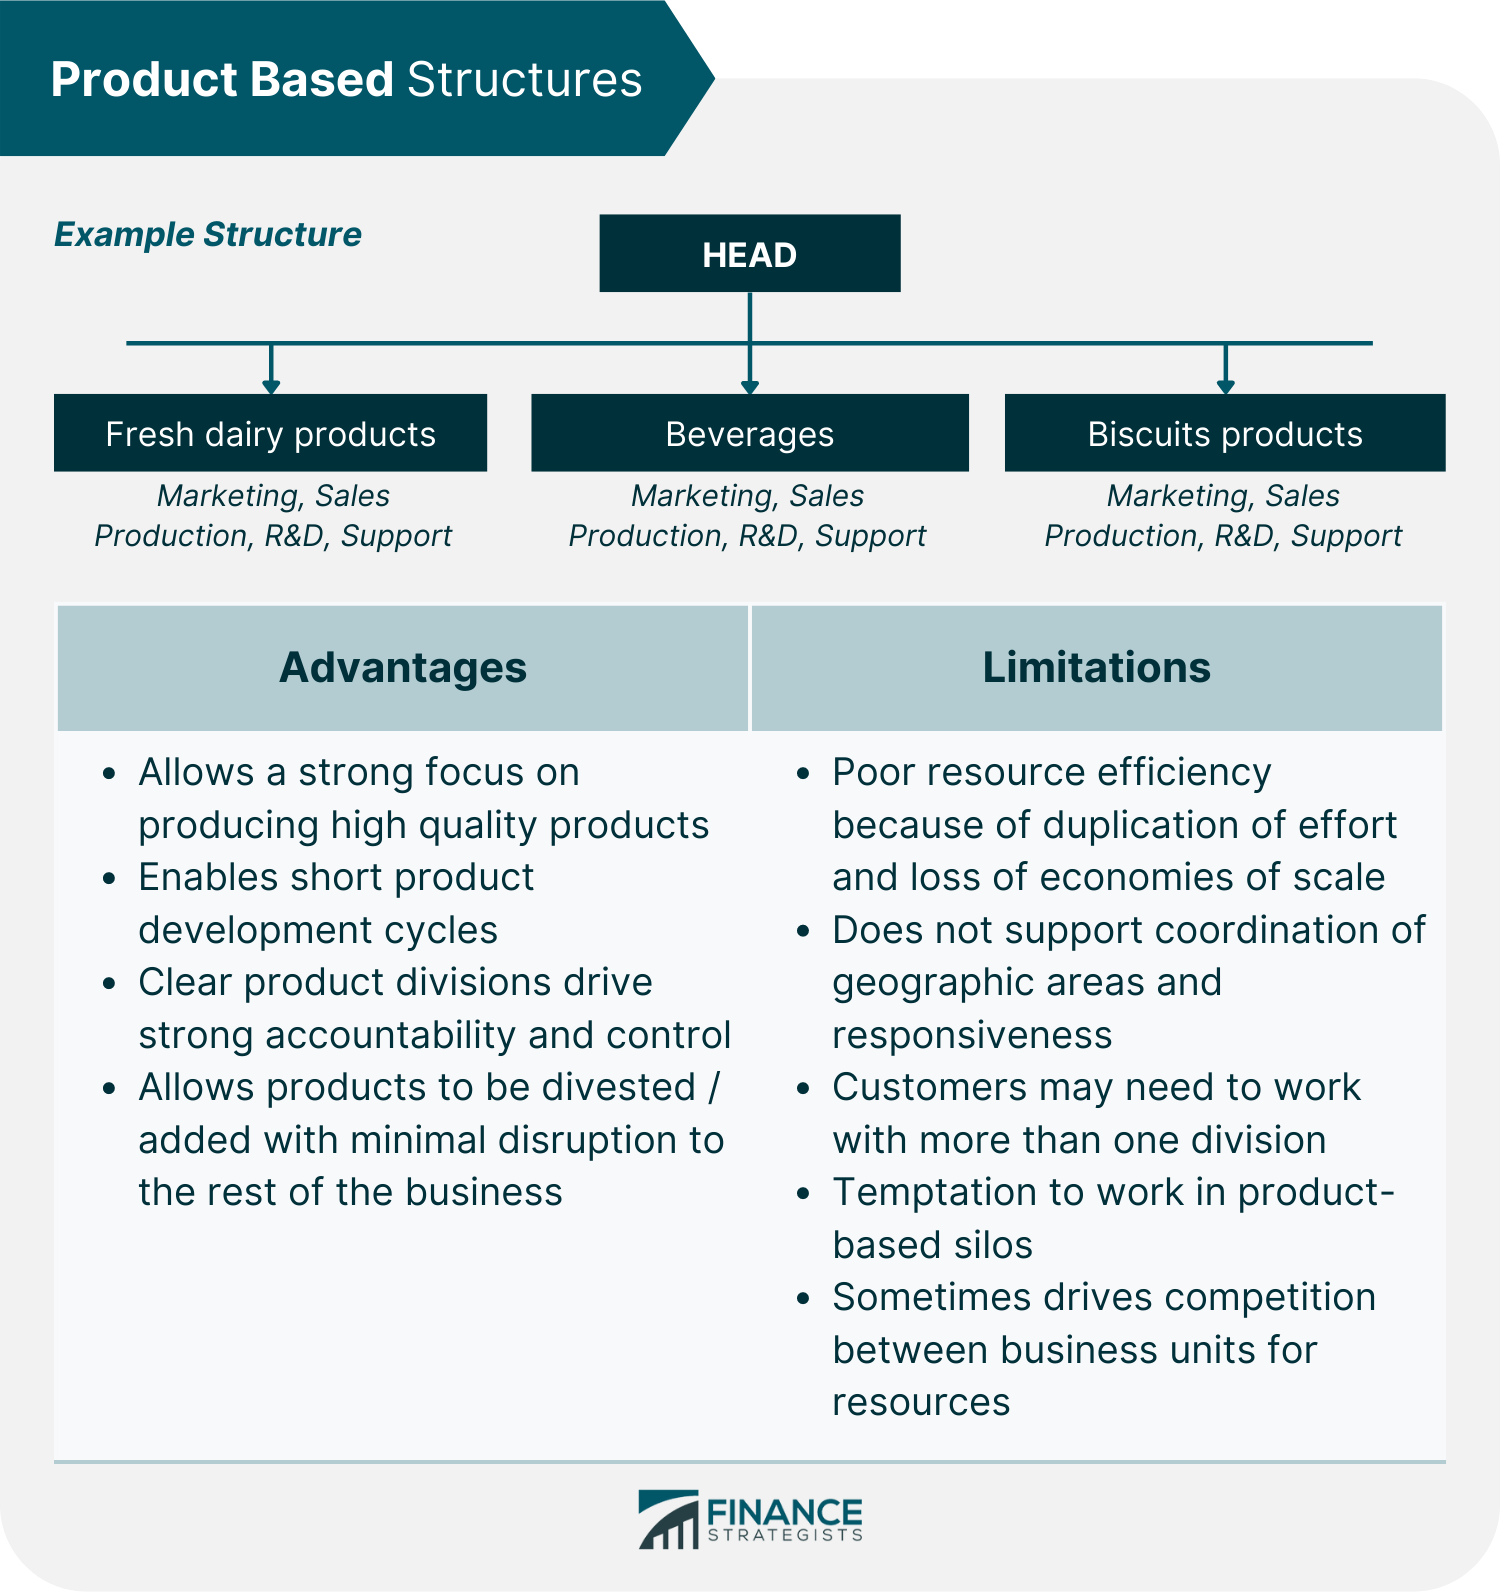 Product Based Structures